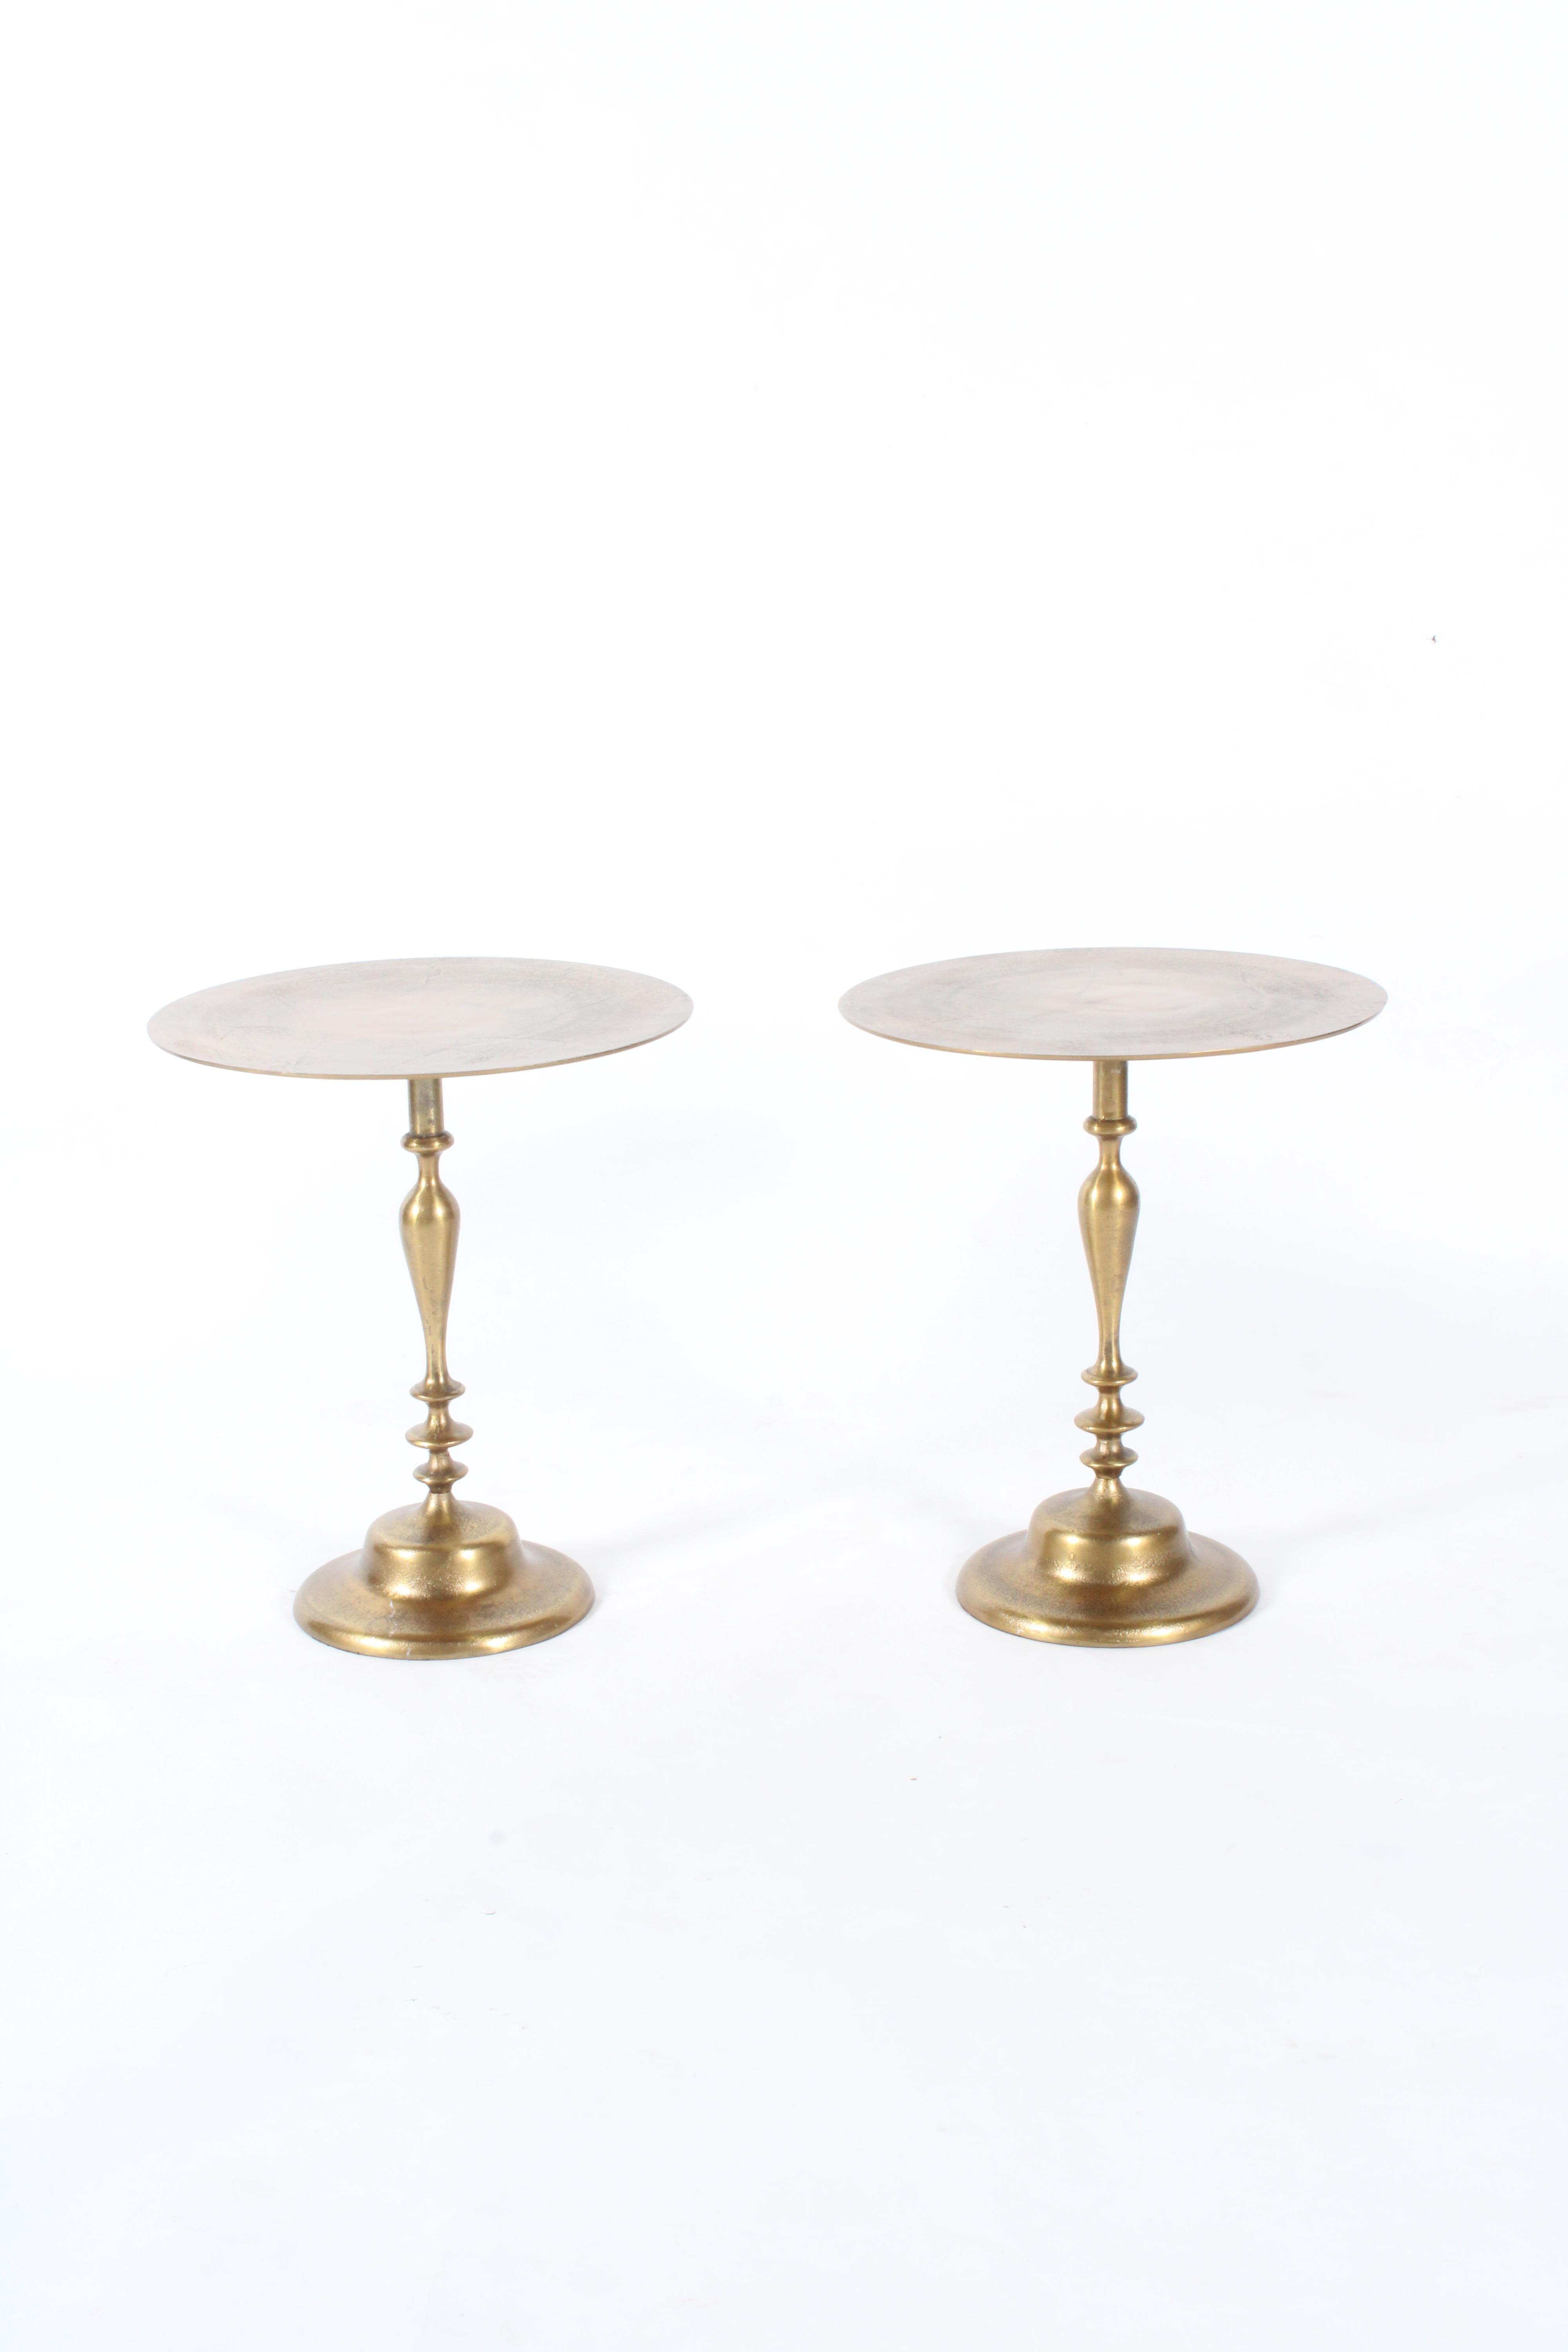 Patinated Historic Side Tables From The Ritz Hotel Paris *Free Worldwide Delivery For Sale